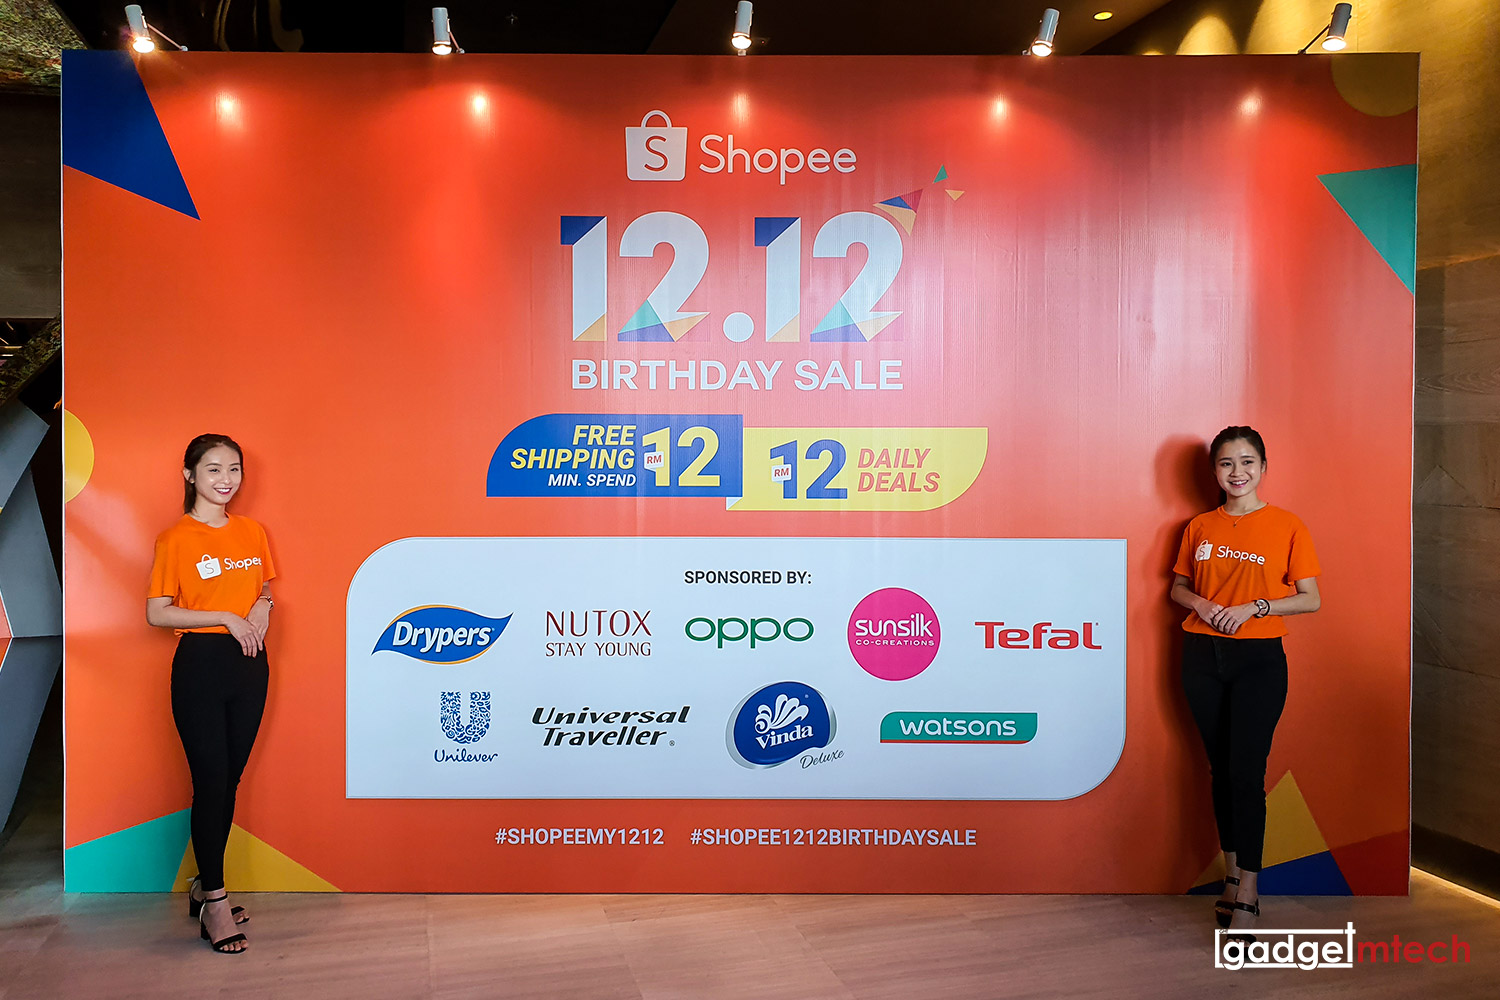 Shopee 12.12 Birthday Sale Offers Amazing Deals and Discounts